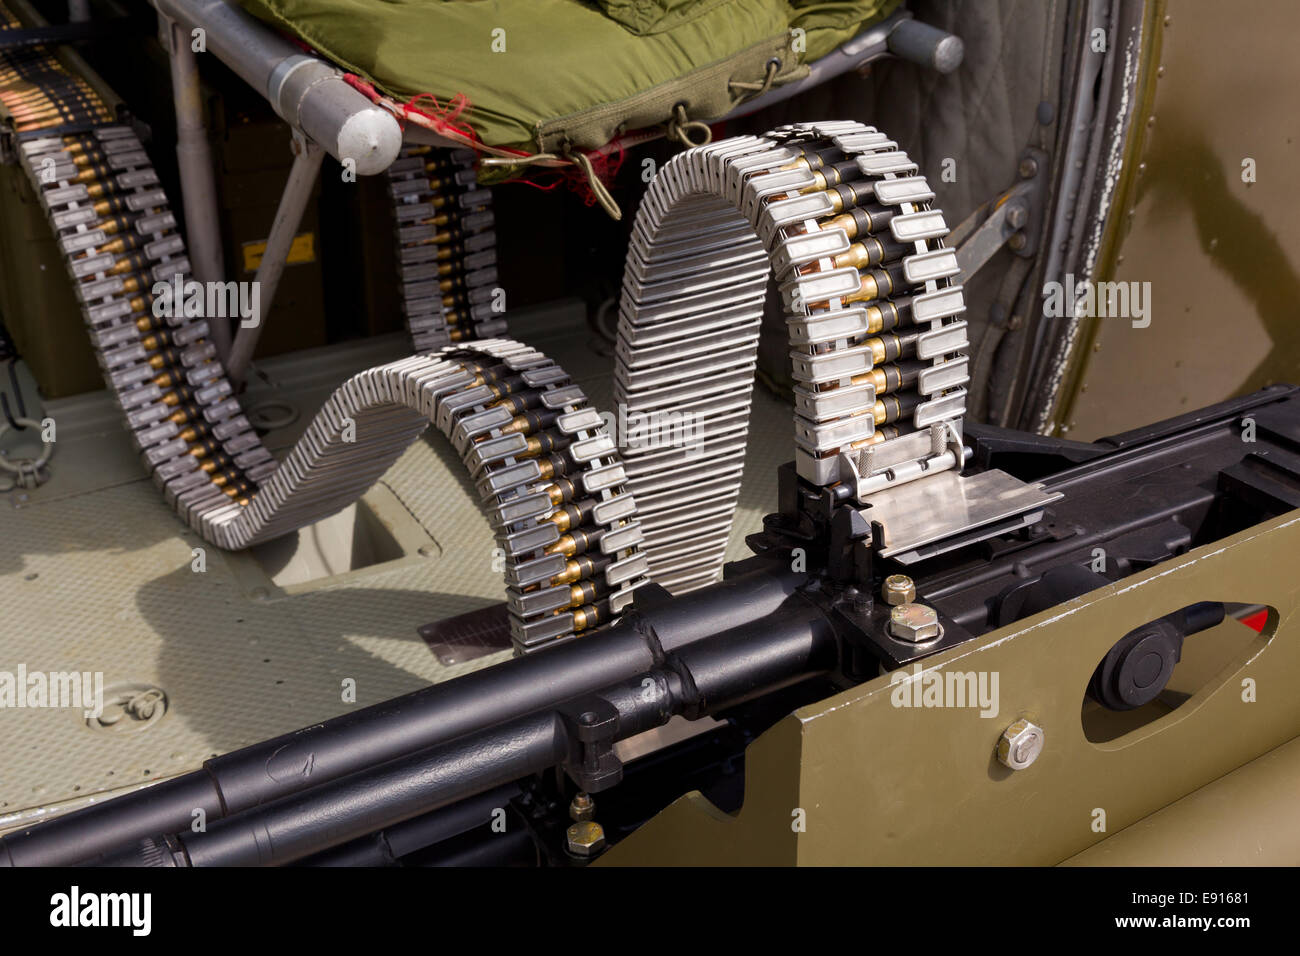 Machine gun on army helicopter Stock Photo